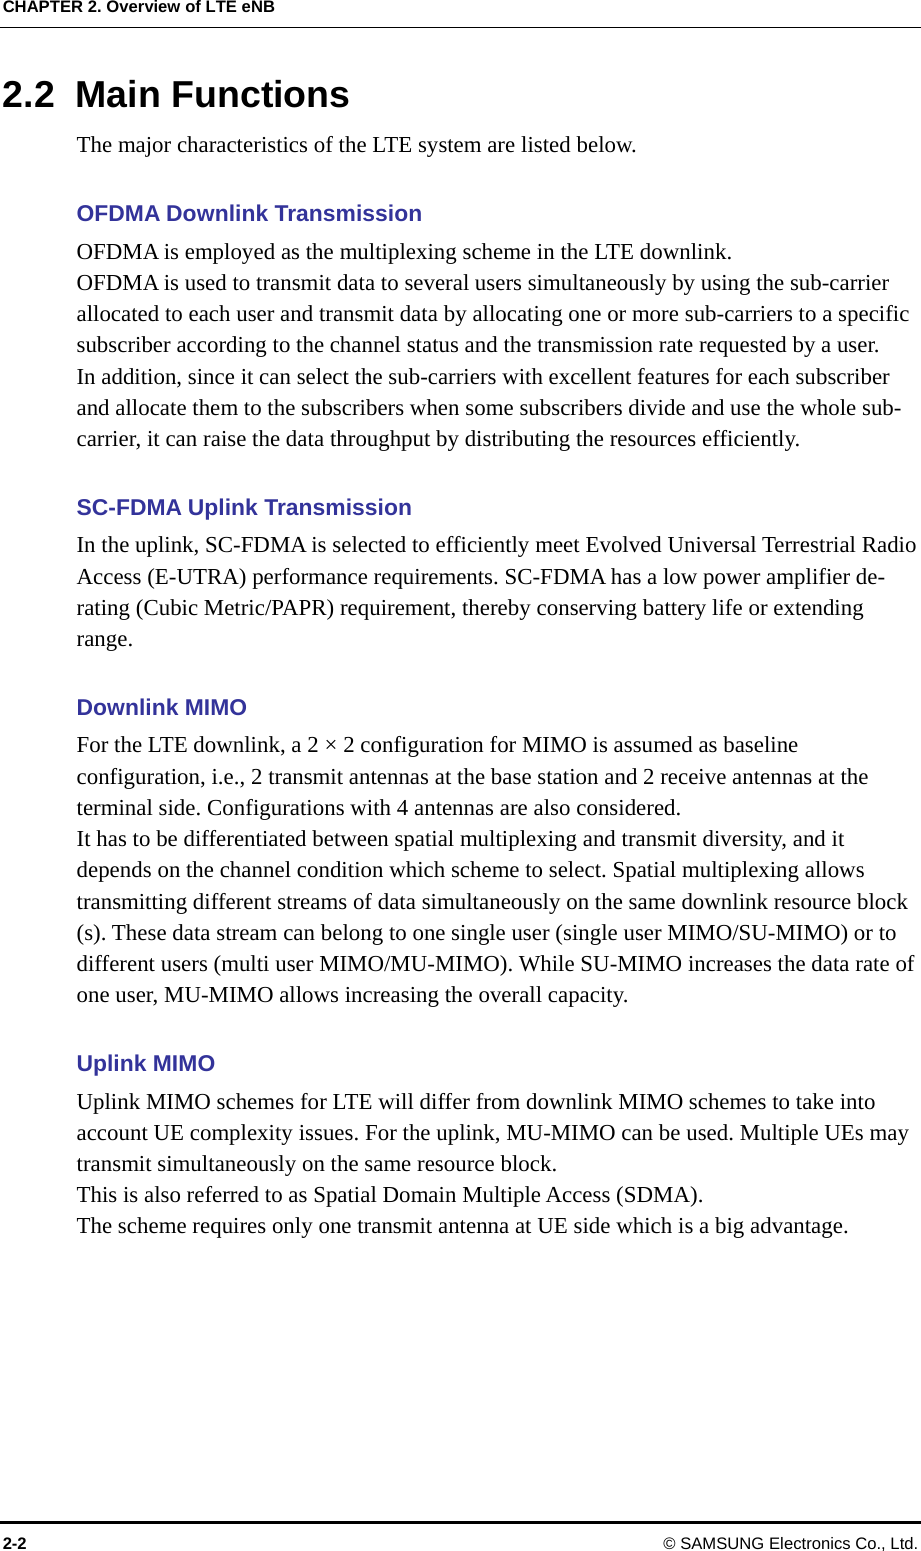 CHAPTER 2. Overview of LTE eNB 2-2  © SAMSUNG Electronics Co., Ltd. 2.2 Main Functions The major characteristics of the LTE system are listed below.  OFDMA Downlink Transmission OFDMA is employed as the multiplexing scheme in the LTE downlink.   OFDMA is used to transmit data to several users simultaneously by using the sub-carrier allocated to each user and transmit data by allocating one or more sub-carriers to a specific subscriber according to the channel status and the transmission rate requested by a user.   In addition, since it can select the sub-carriers with excellent features for each subscriber and allocate them to the subscribers when some subscribers divide and use the whole sub-carrier, it can raise the data throughput by distributing the resources efficiently.  SC-FDMA Uplink Transmission In the uplink, SC-FDMA is selected to efficiently meet Evolved Universal Terrestrial Radio Access (E-UTRA) performance requirements. SC-FDMA has a low power amplifier de-rating (Cubic Metric/PAPR) requirement, thereby conserving battery life or extending range.   Downlink MIMO For the LTE downlink, a 2 × 2 configuration for MIMO is assumed as baseline configuration, i.e., 2 transmit antennas at the base station and 2 receive antennas at the terminal side. Configurations with 4 antennas are also considered.   It has to be differentiated between spatial multiplexing and transmit diversity, and it depends on the channel condition which scheme to select. Spatial multiplexing allows transmitting different streams of data simultaneously on the same downlink resource block (s). These data stream can belong to one single user (single user MIMO/SU-MIMO) or to different users (multi user MIMO/MU-MIMO). While SU-MIMO increases the data rate of one user, MU-MIMO allows increasing the overall capacity.  Uplink MIMO Uplink MIMO schemes for LTE will differ from downlink MIMO schemes to take into account UE complexity issues. For the uplink, MU-MIMO can be used. Multiple UEs may transmit simultaneously on the same resource block. This is also referred to as Spatial Domain Multiple Access (SDMA). The scheme requires only one transmit antenna at UE side which is a big advantage.    